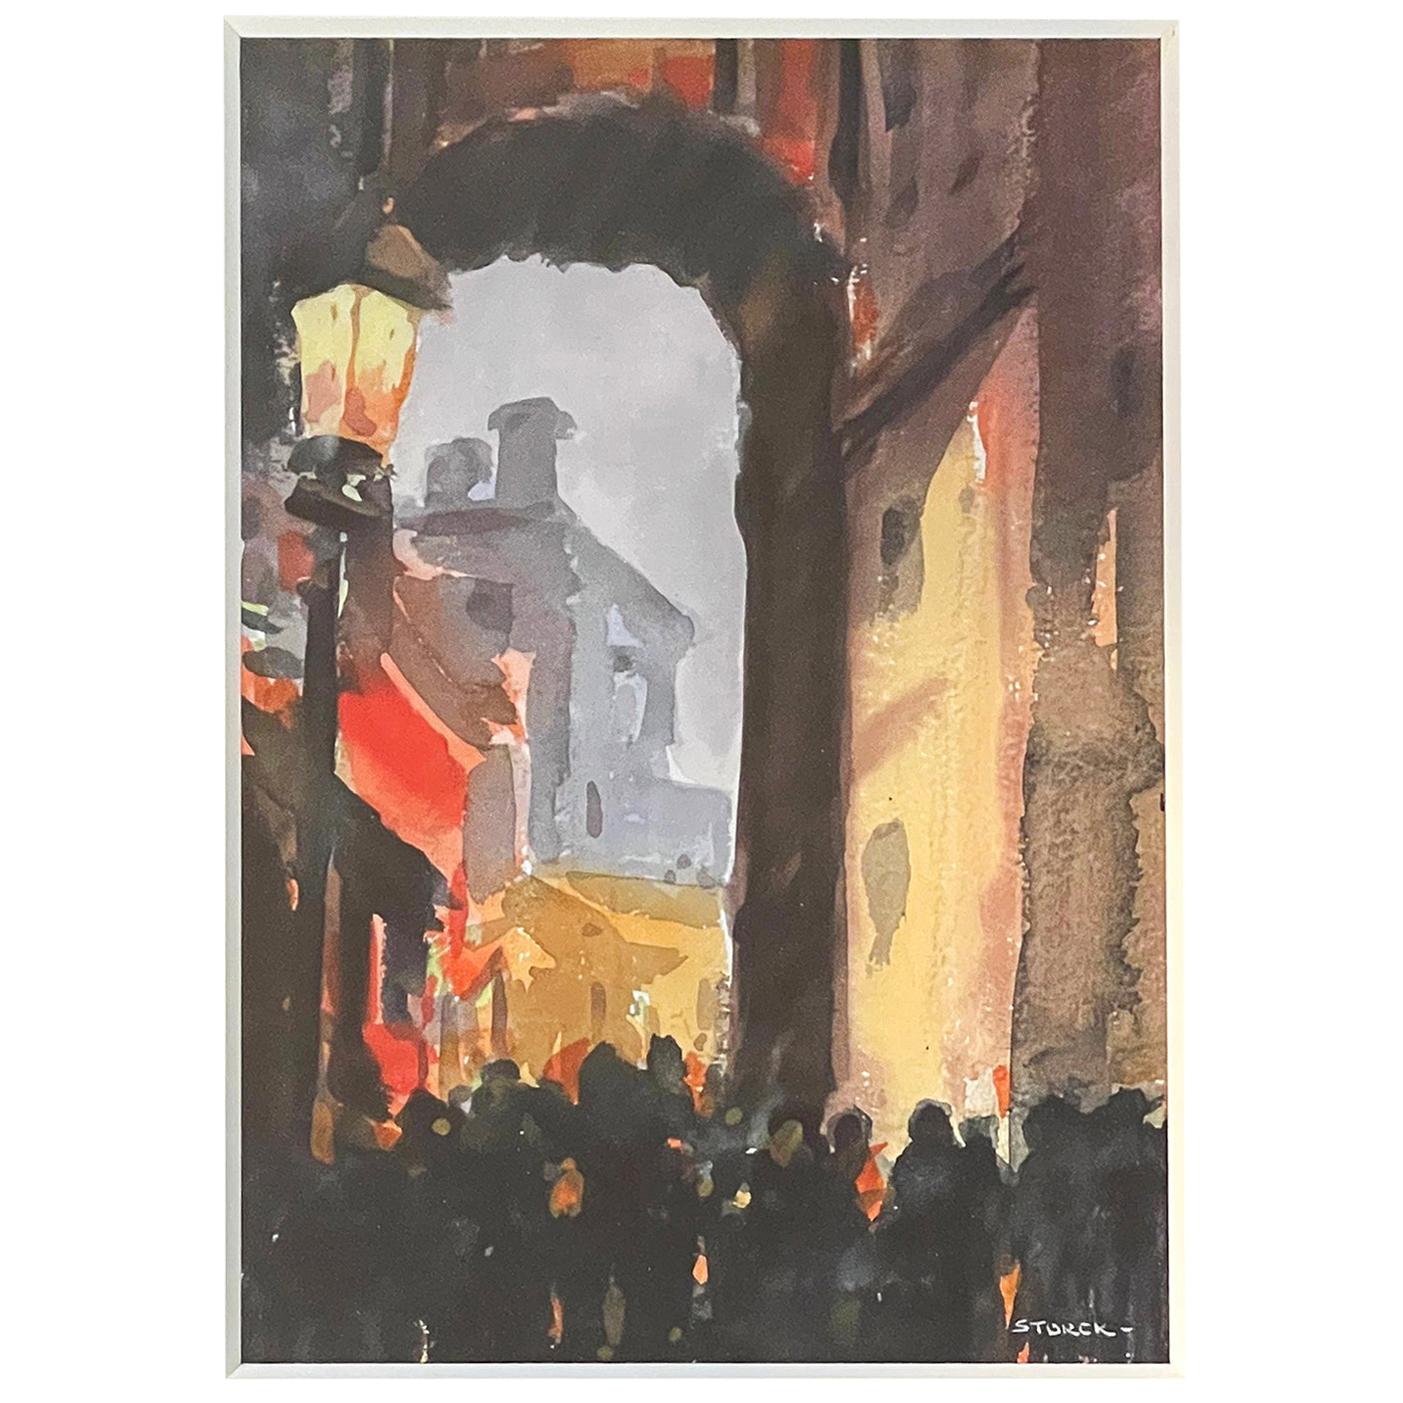 "Through the Archway, " Atmospheric Watercolor Scene in Gray and Red by Storck